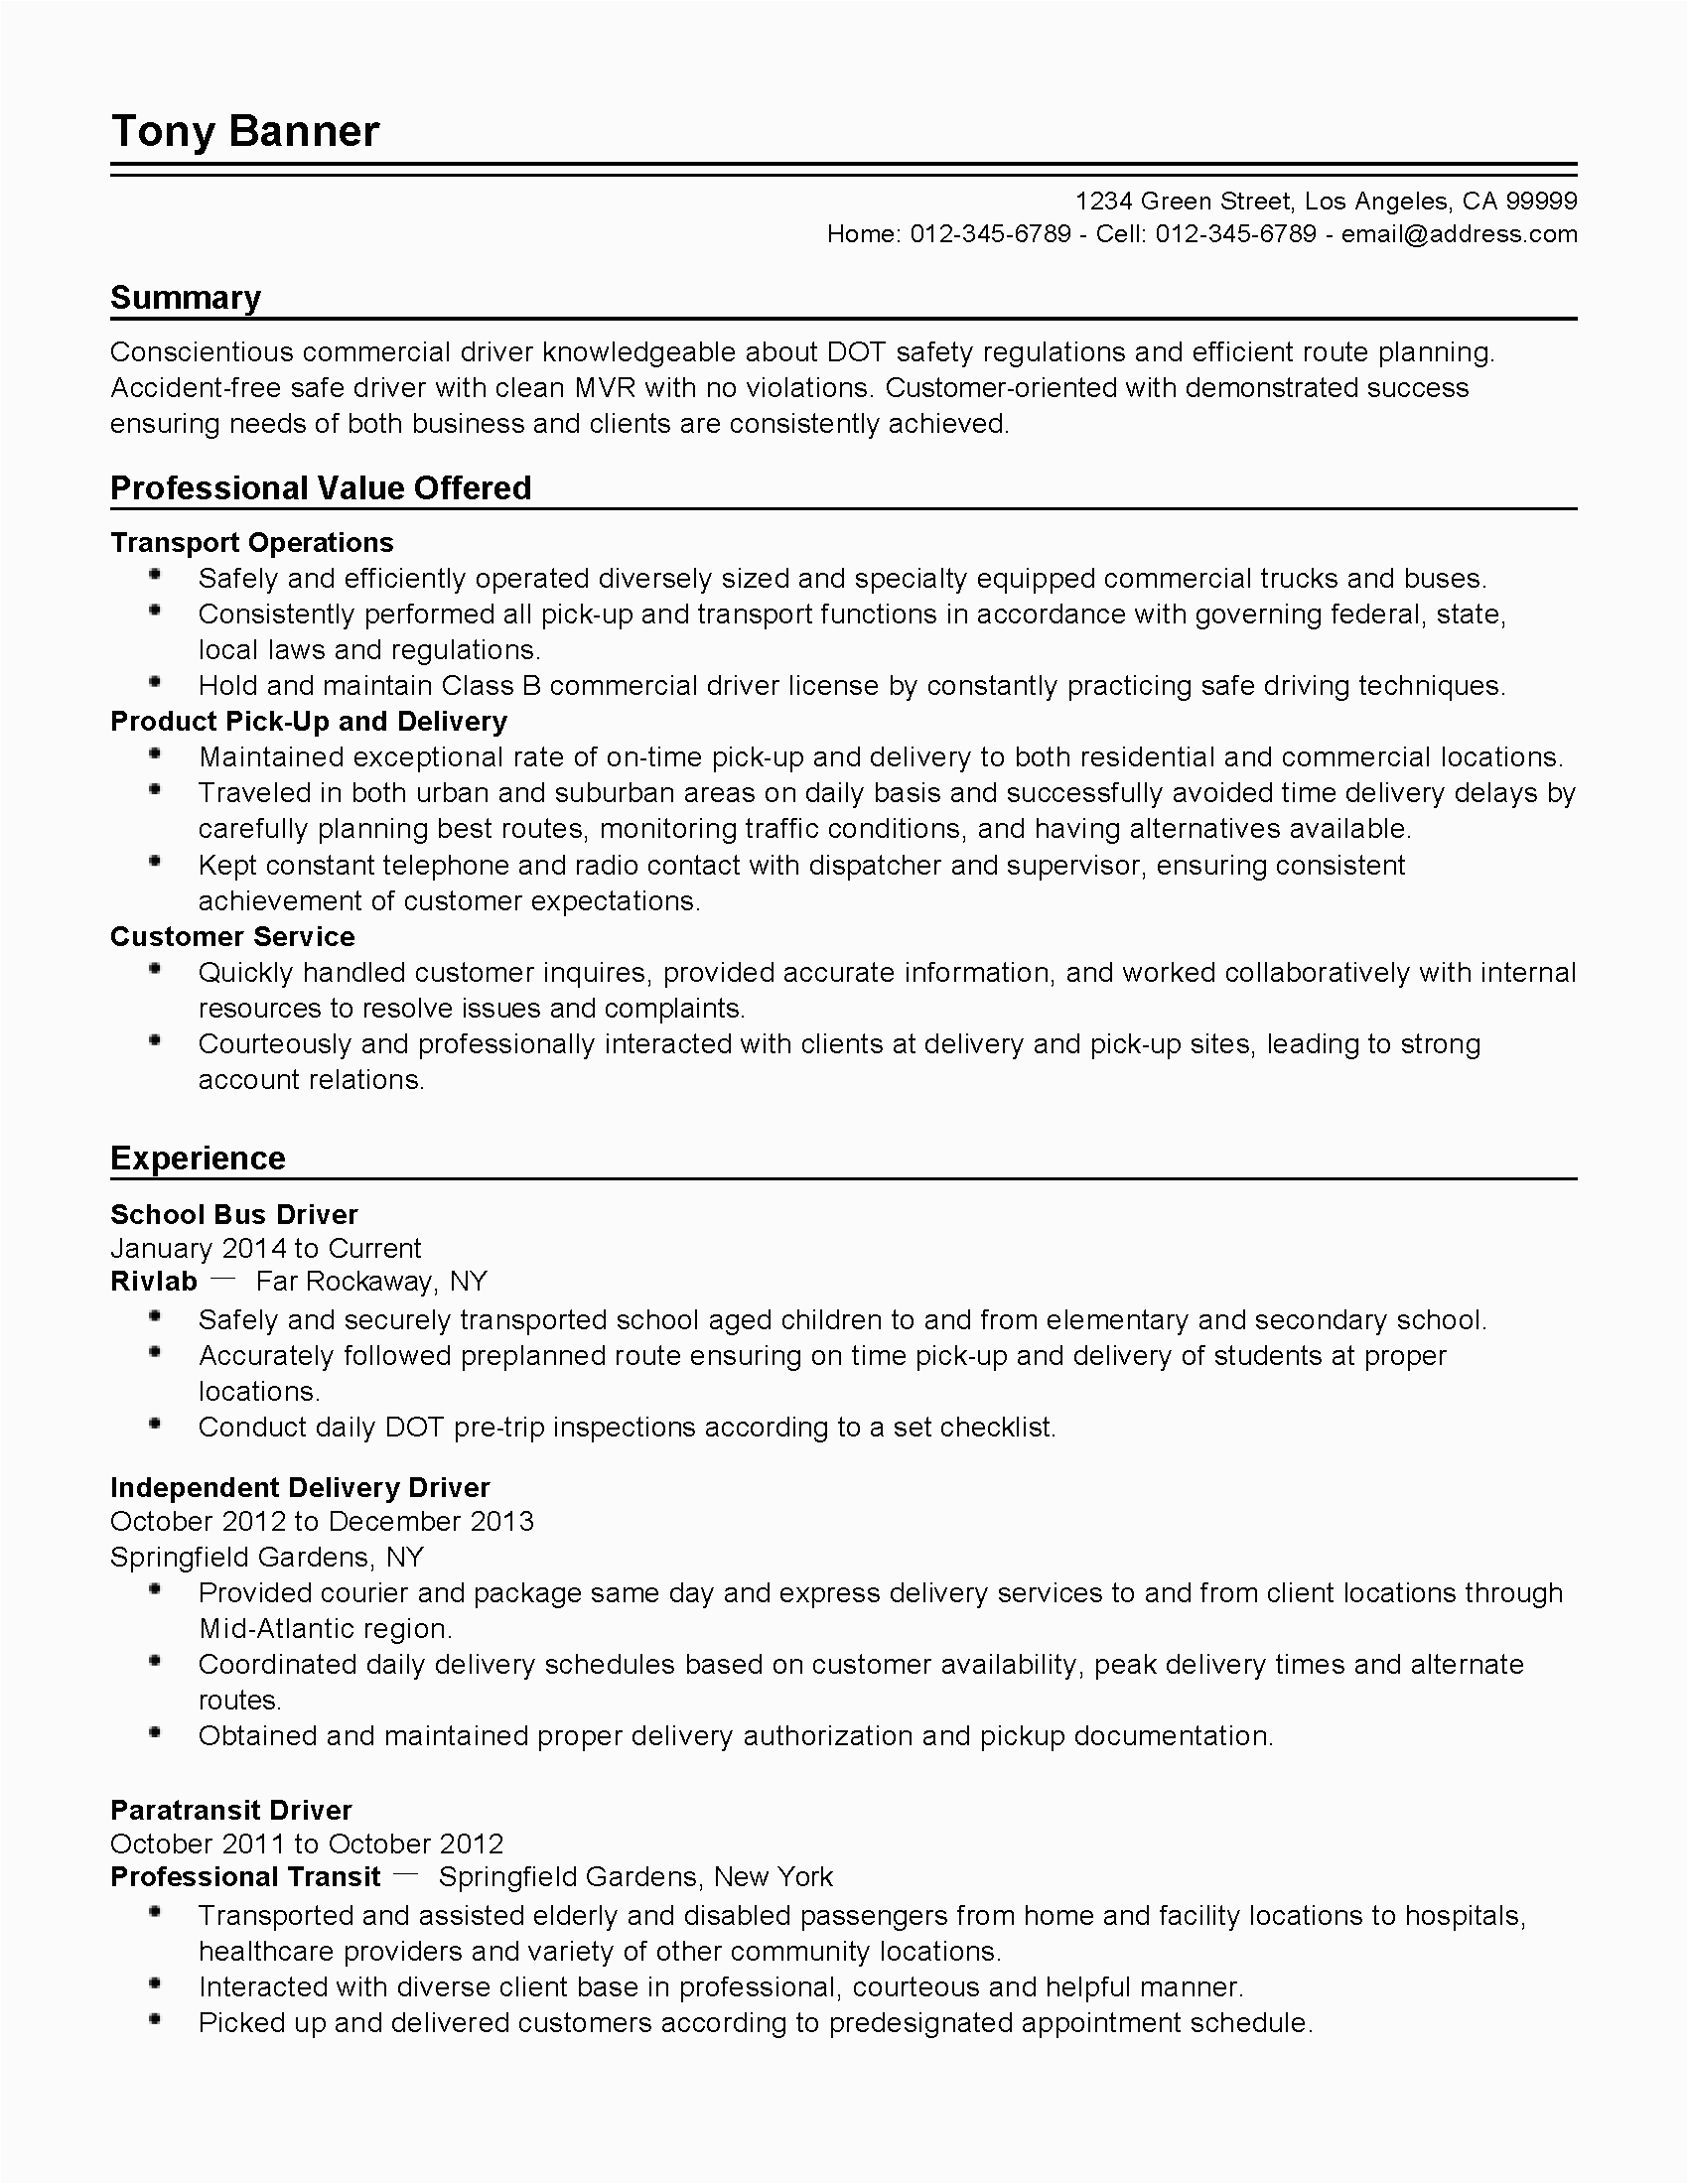 Sample Resume for School Bus Driver Position School Bus Driver Resume Example